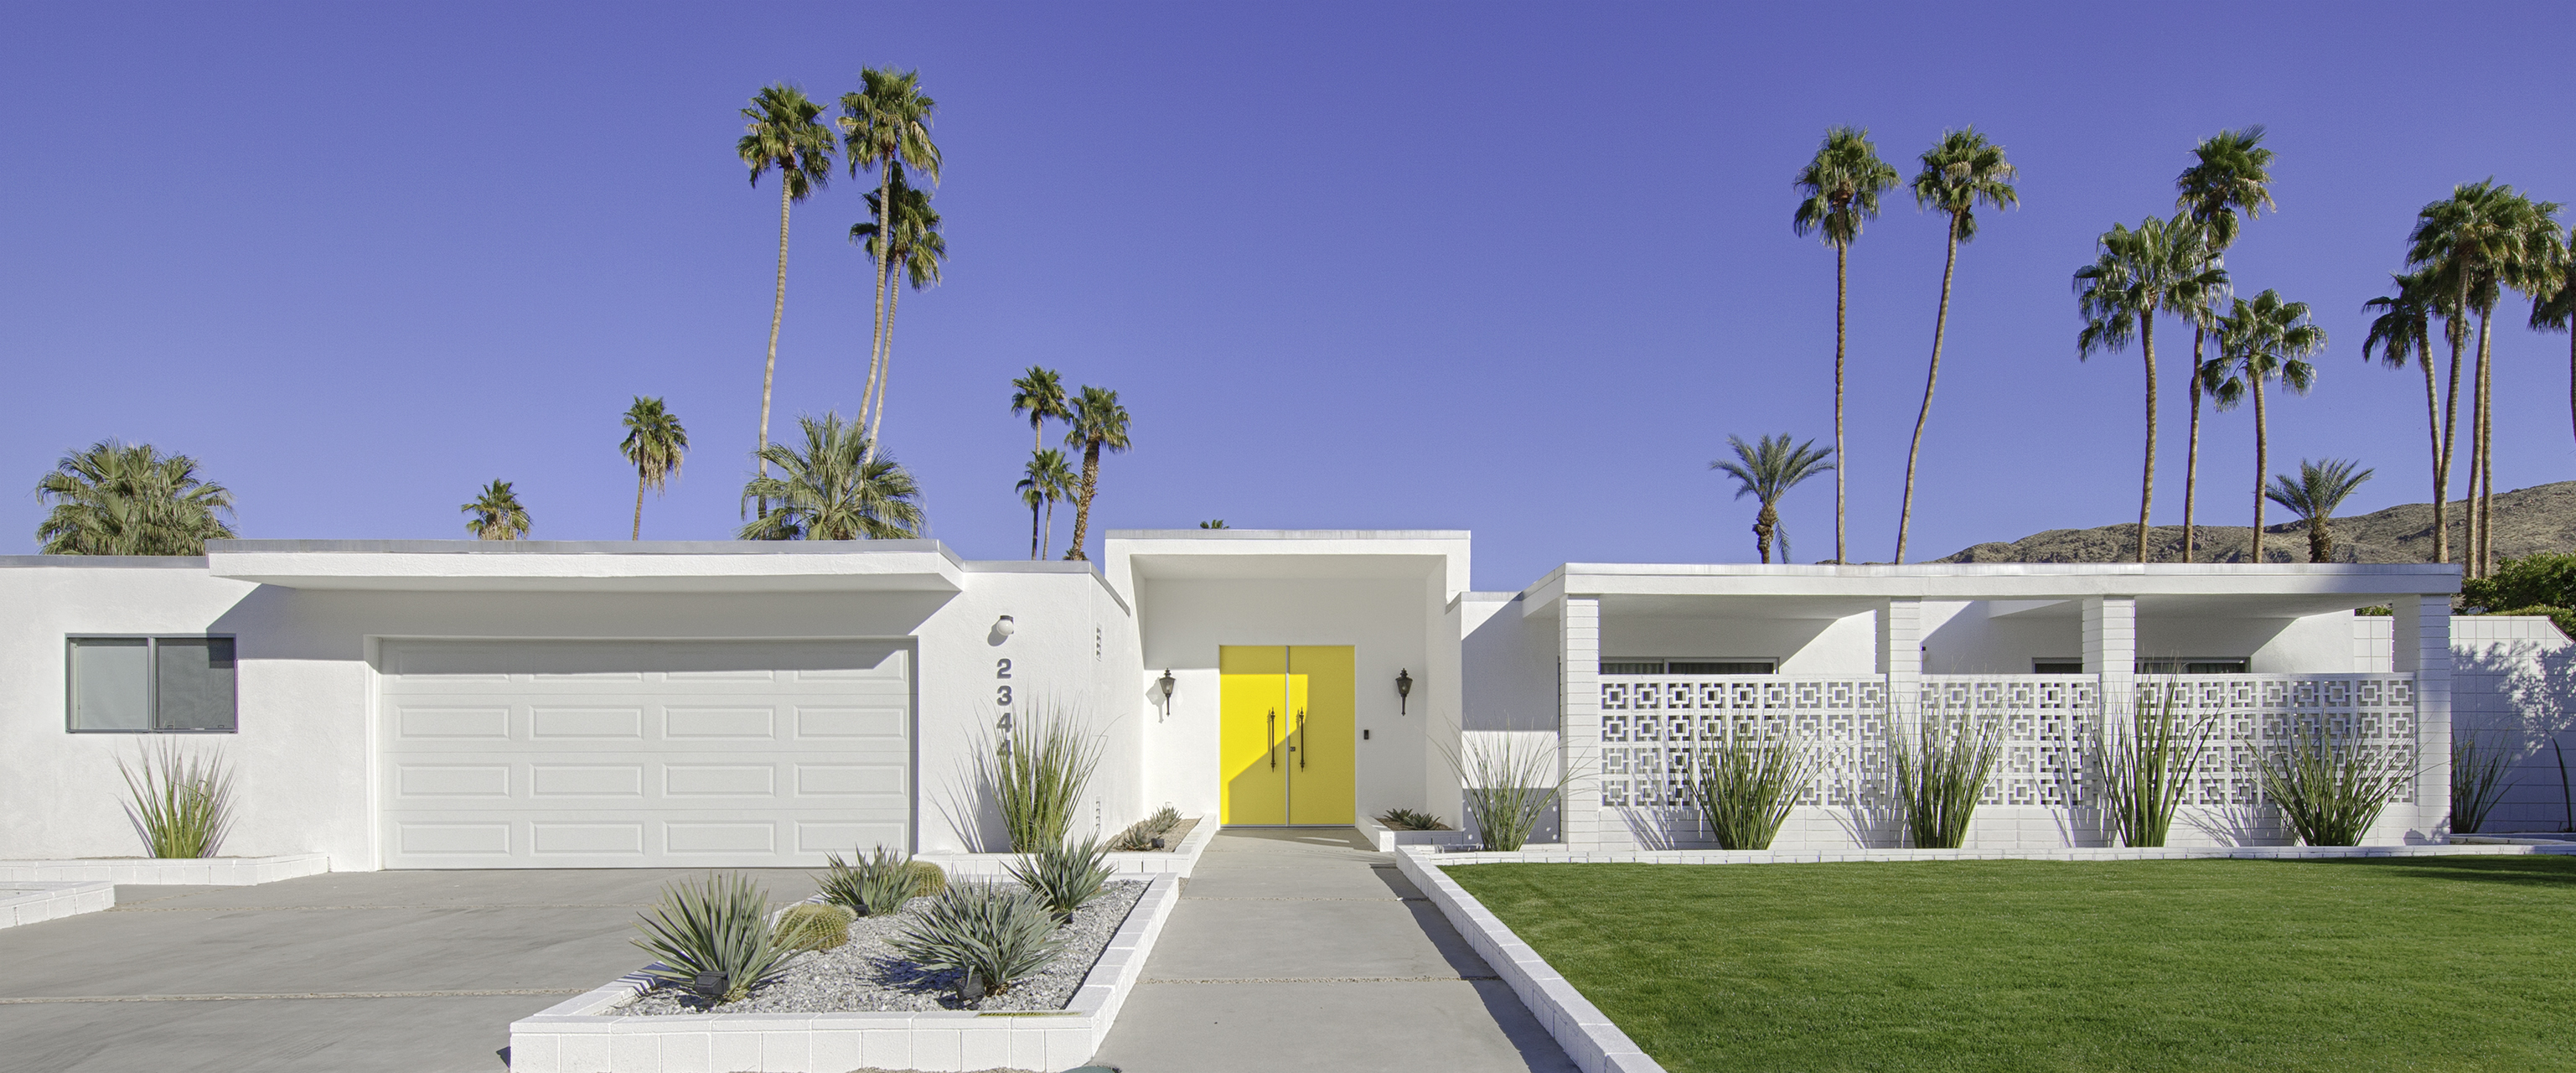 fee simple vs lease land in the coachella valley